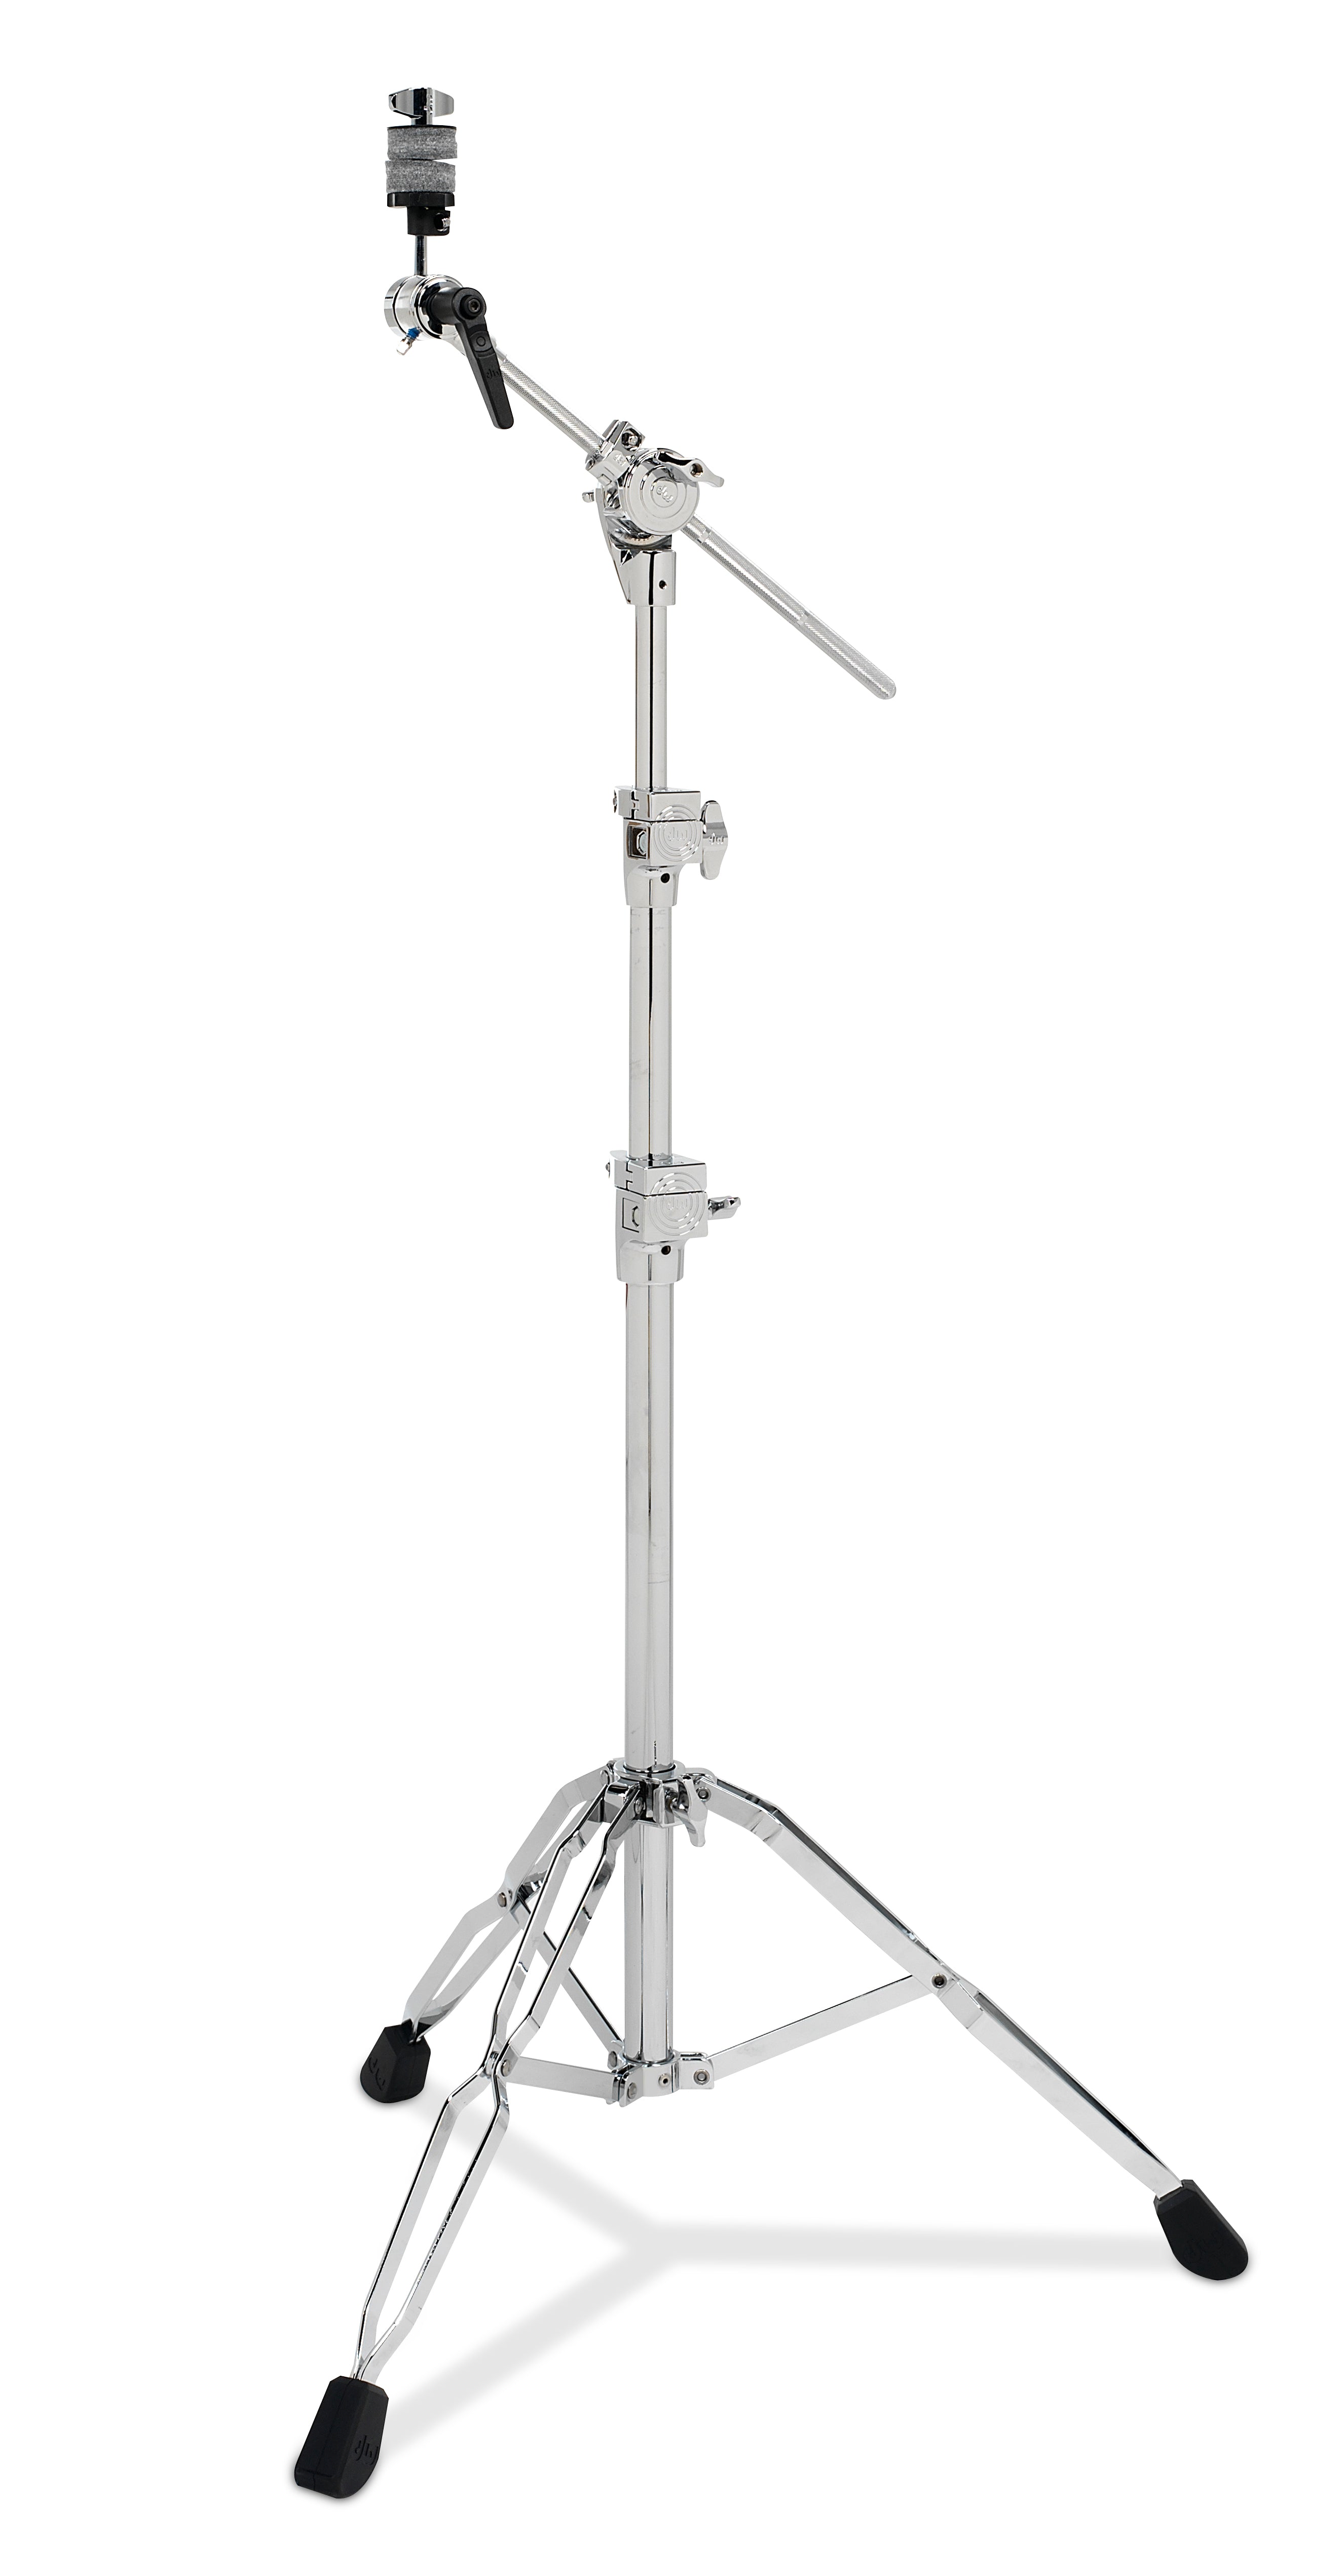 Cymbal　DWCP5700　Boom　DW　Stand　DW　Hardware:　The　Store